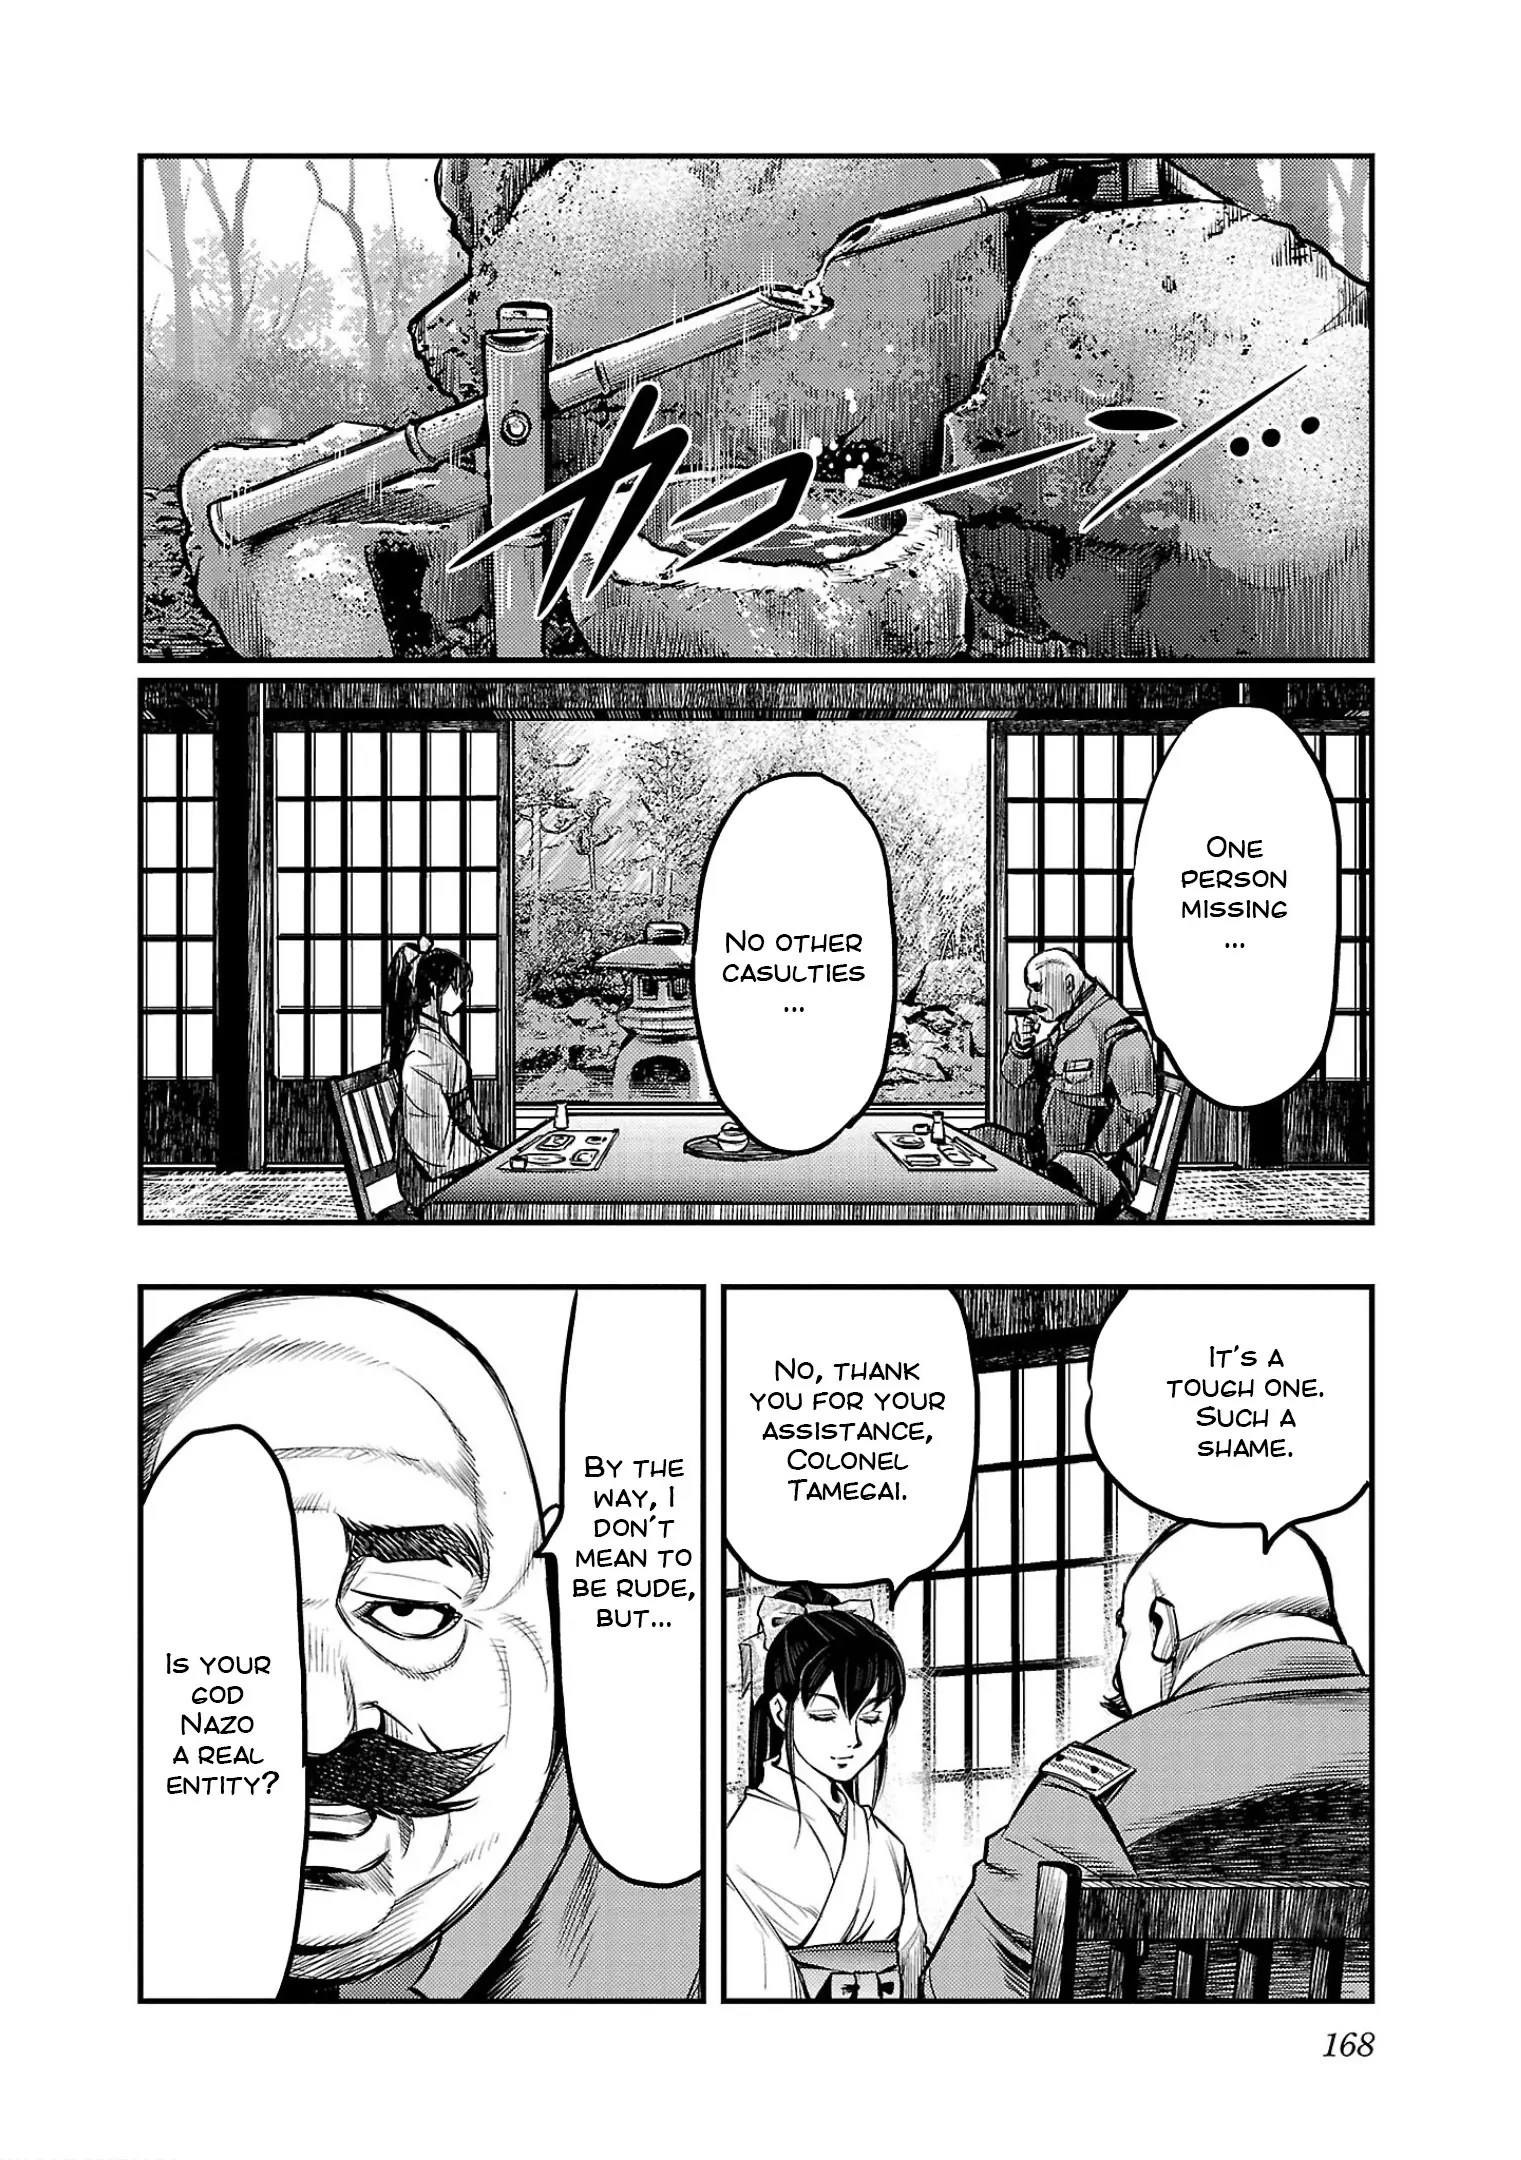 Golden Bat - A Mysterious Story Of The Taisho Era's Skull - 5 page 28-8e23400a